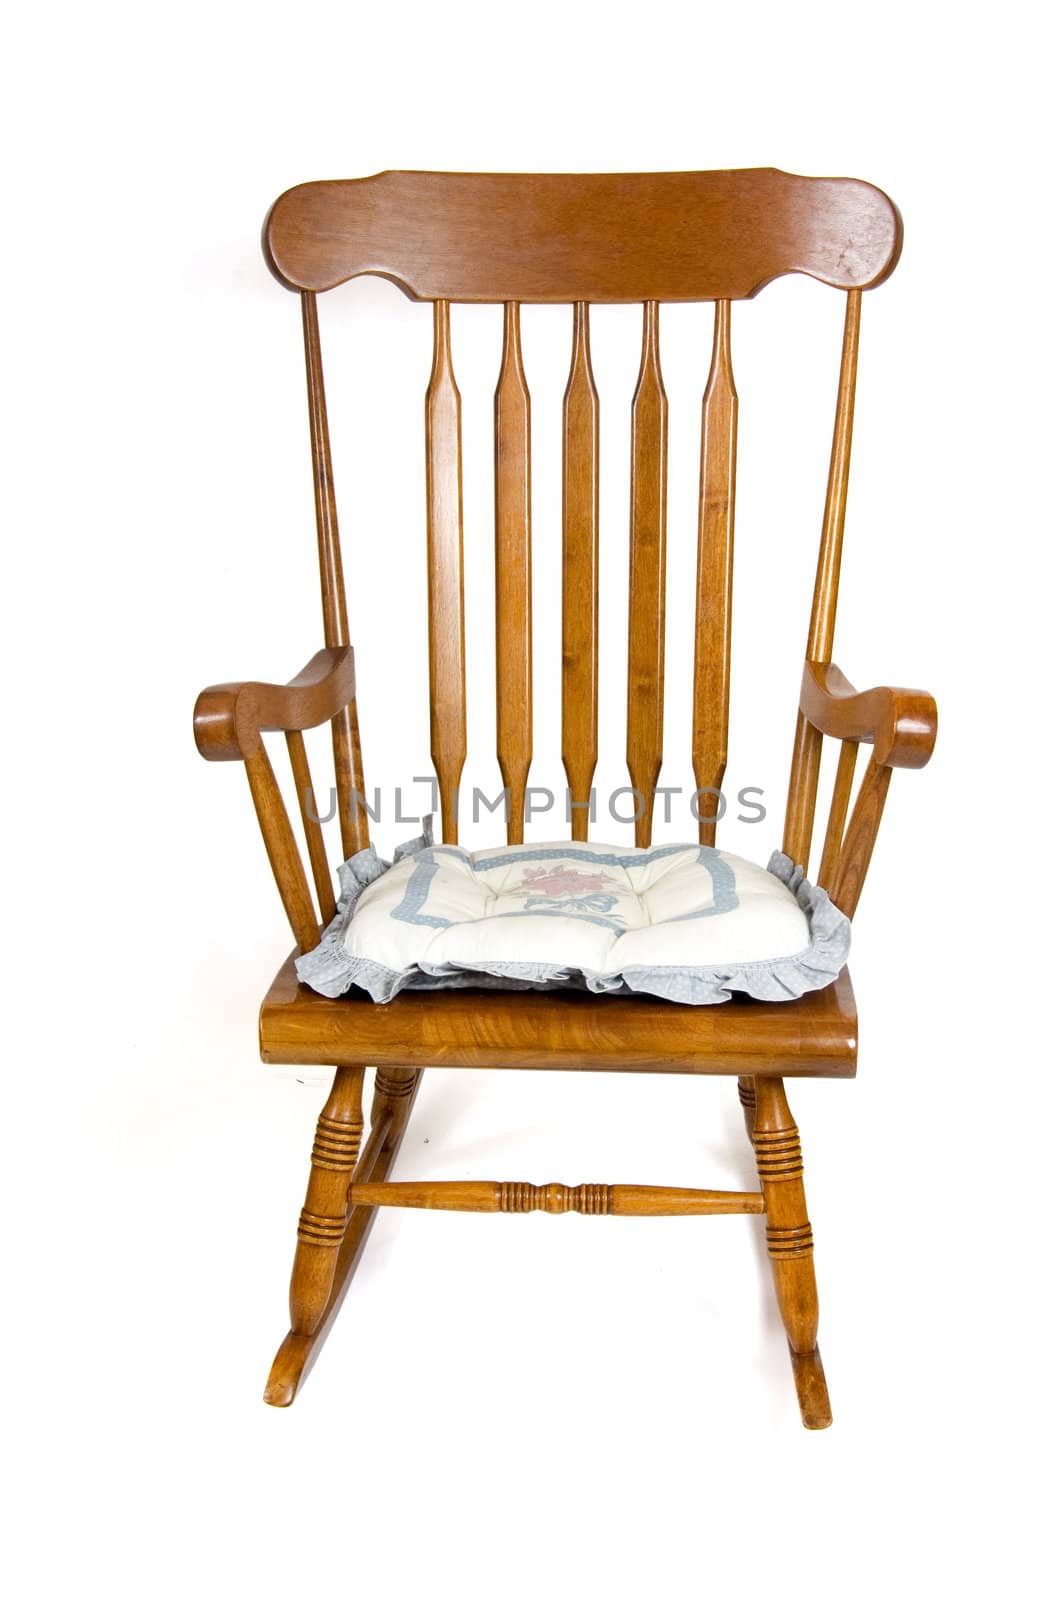 brown rocking chair isolated on white